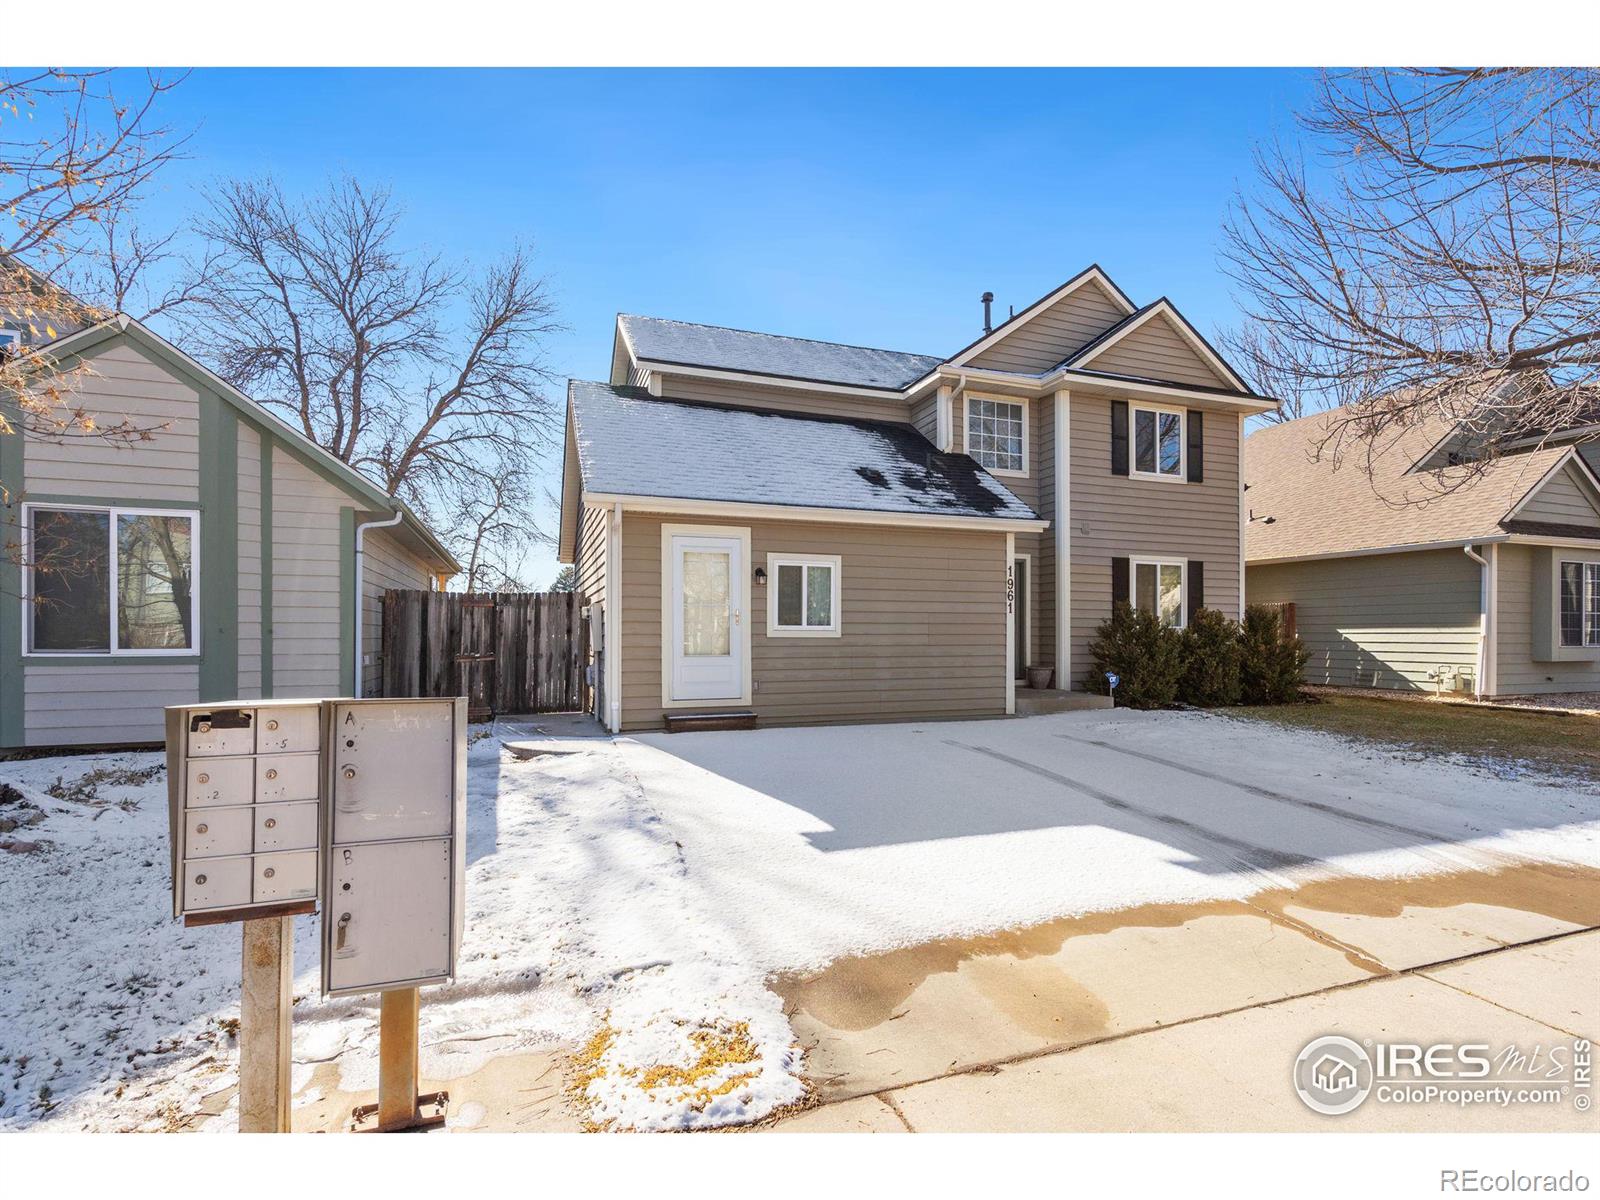 Report Image for 1961  Massachusetts Street,Fort Collins, Colorado